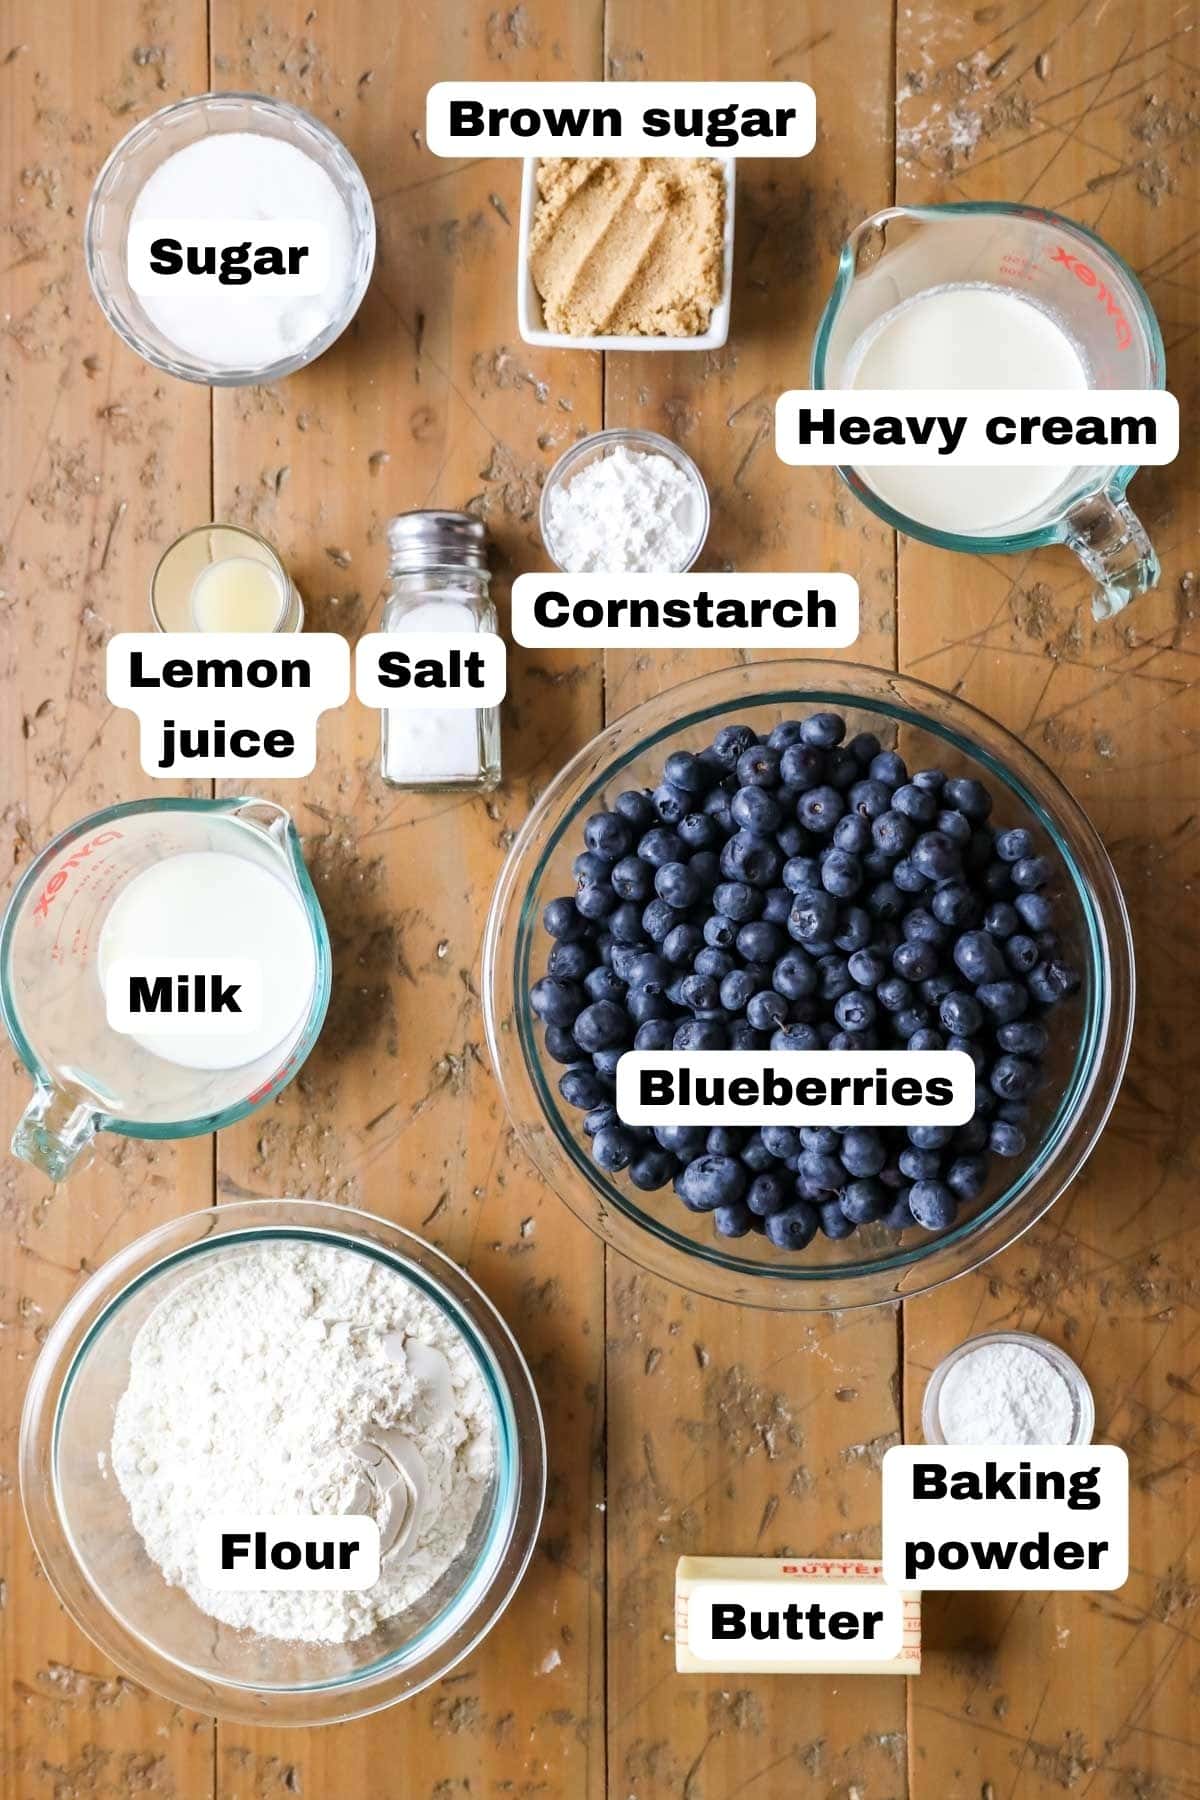 Overhead view of labeled ingredients including blueberries, brown sugar, flour, and more.